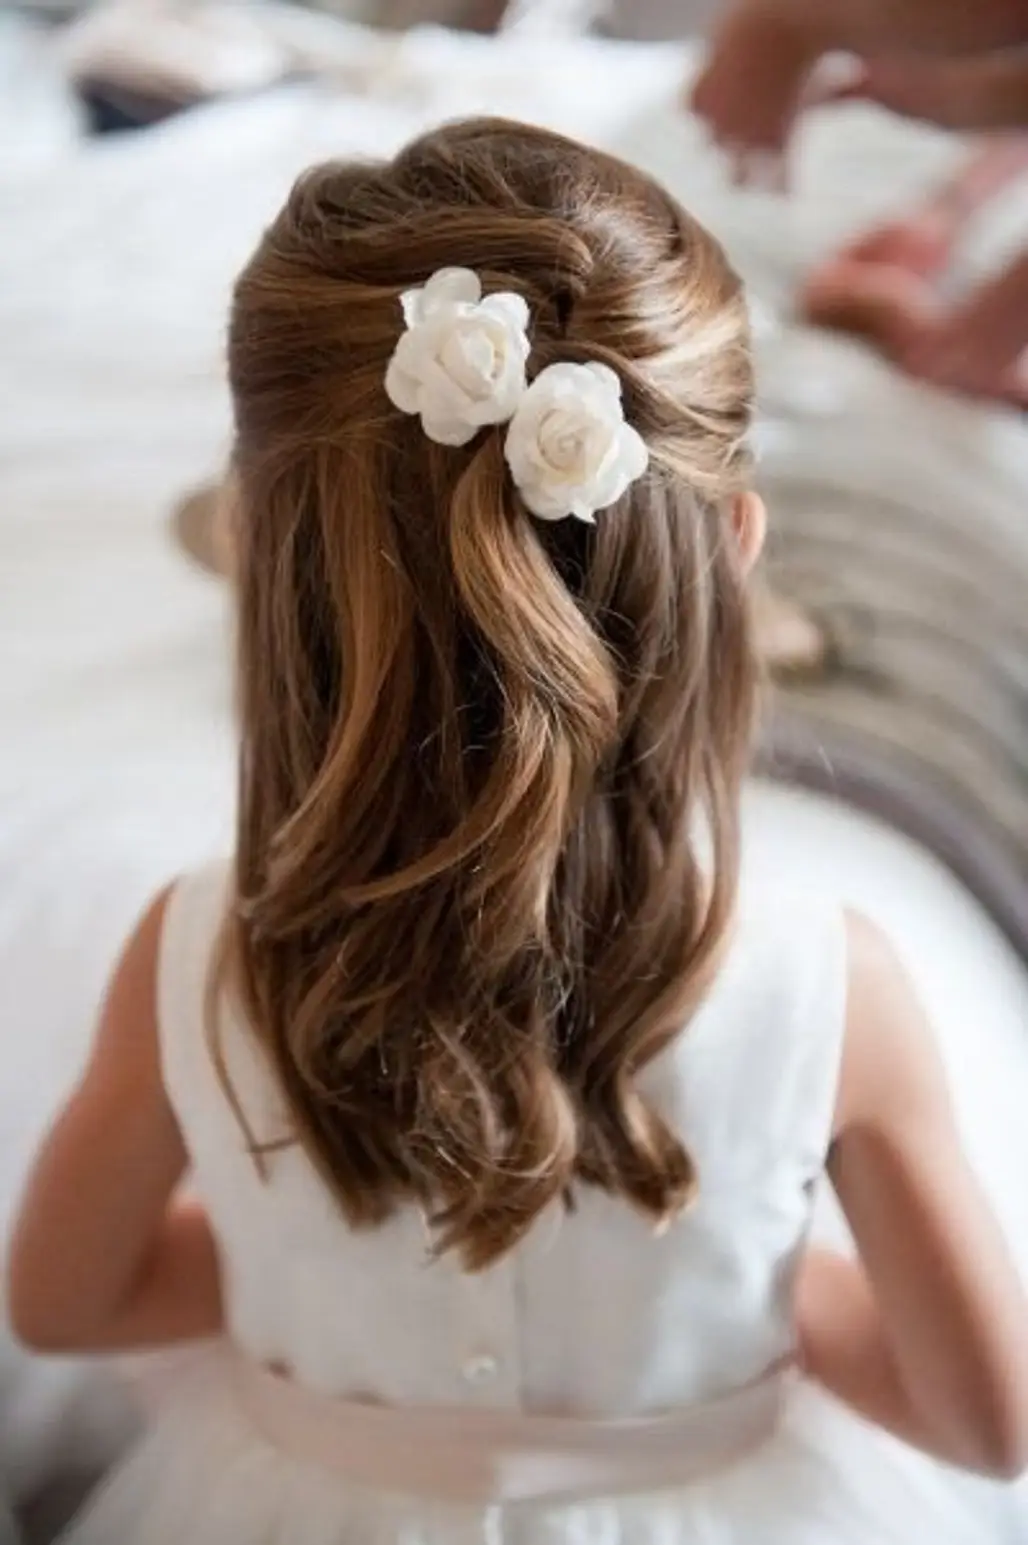 hair,bridal accessory,clothing,hairstyle,bride,